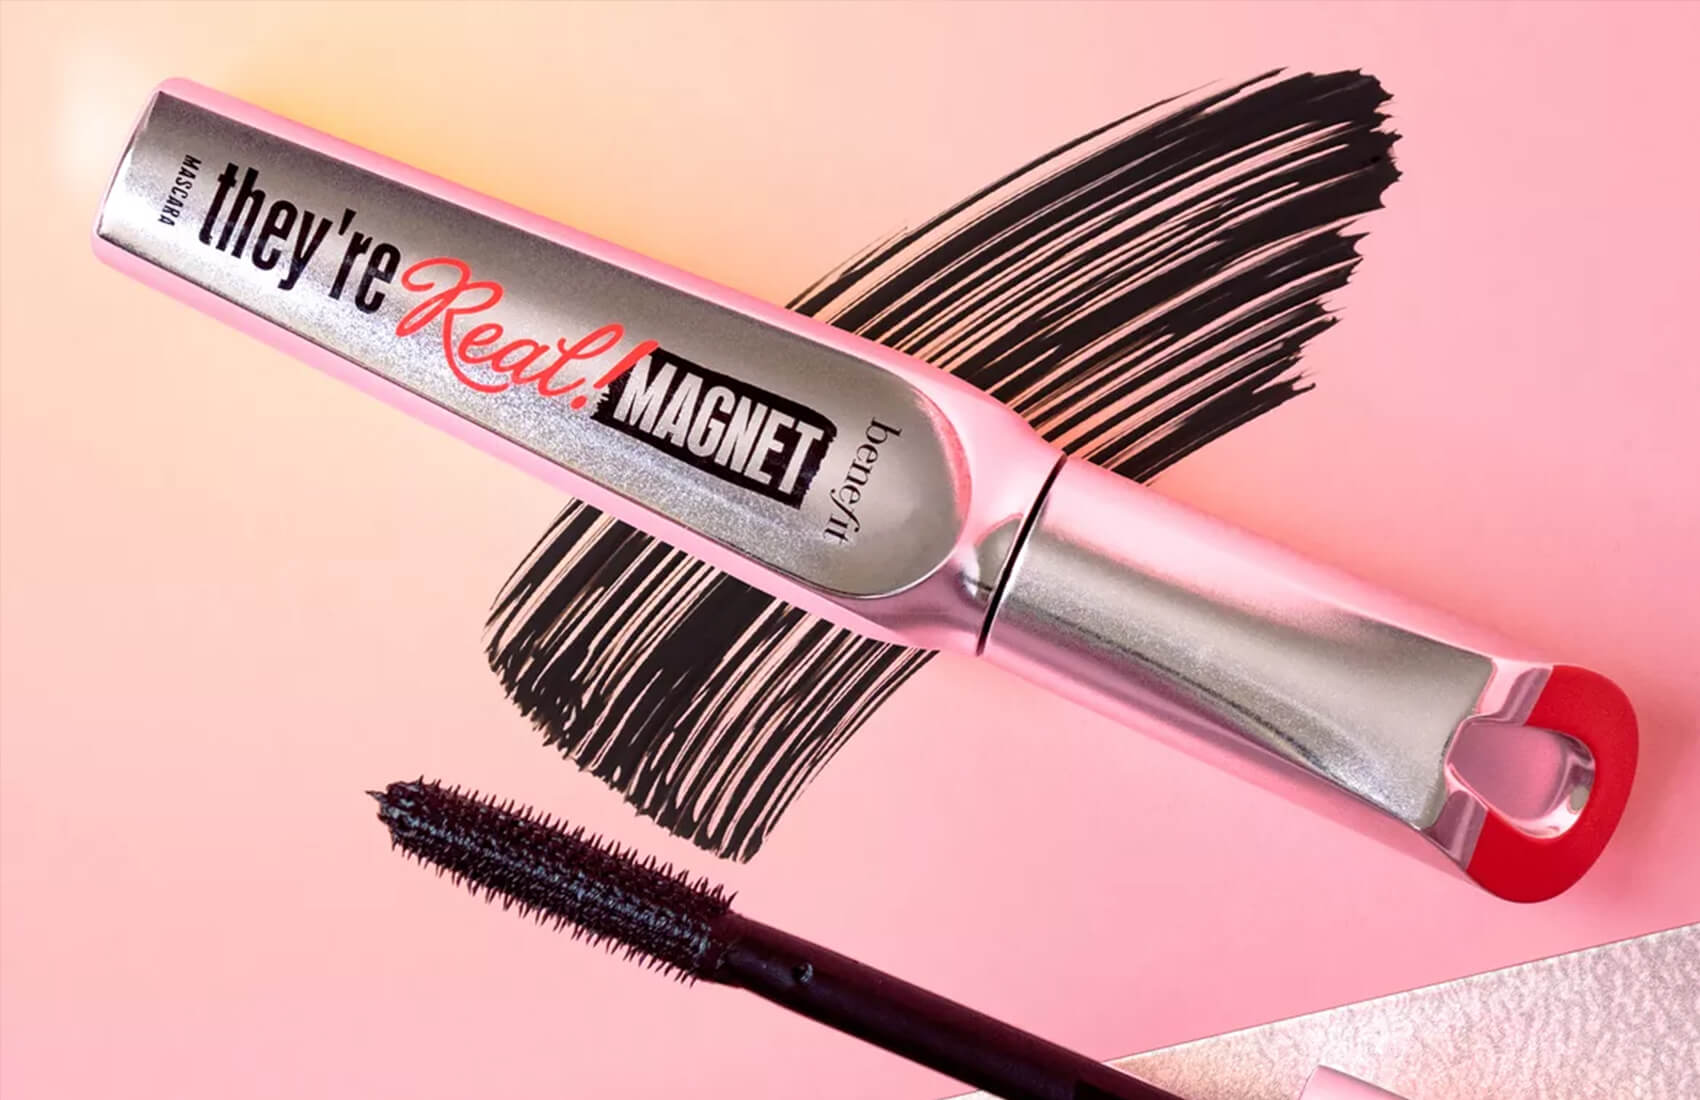 Theyre-real-magnet-mascara